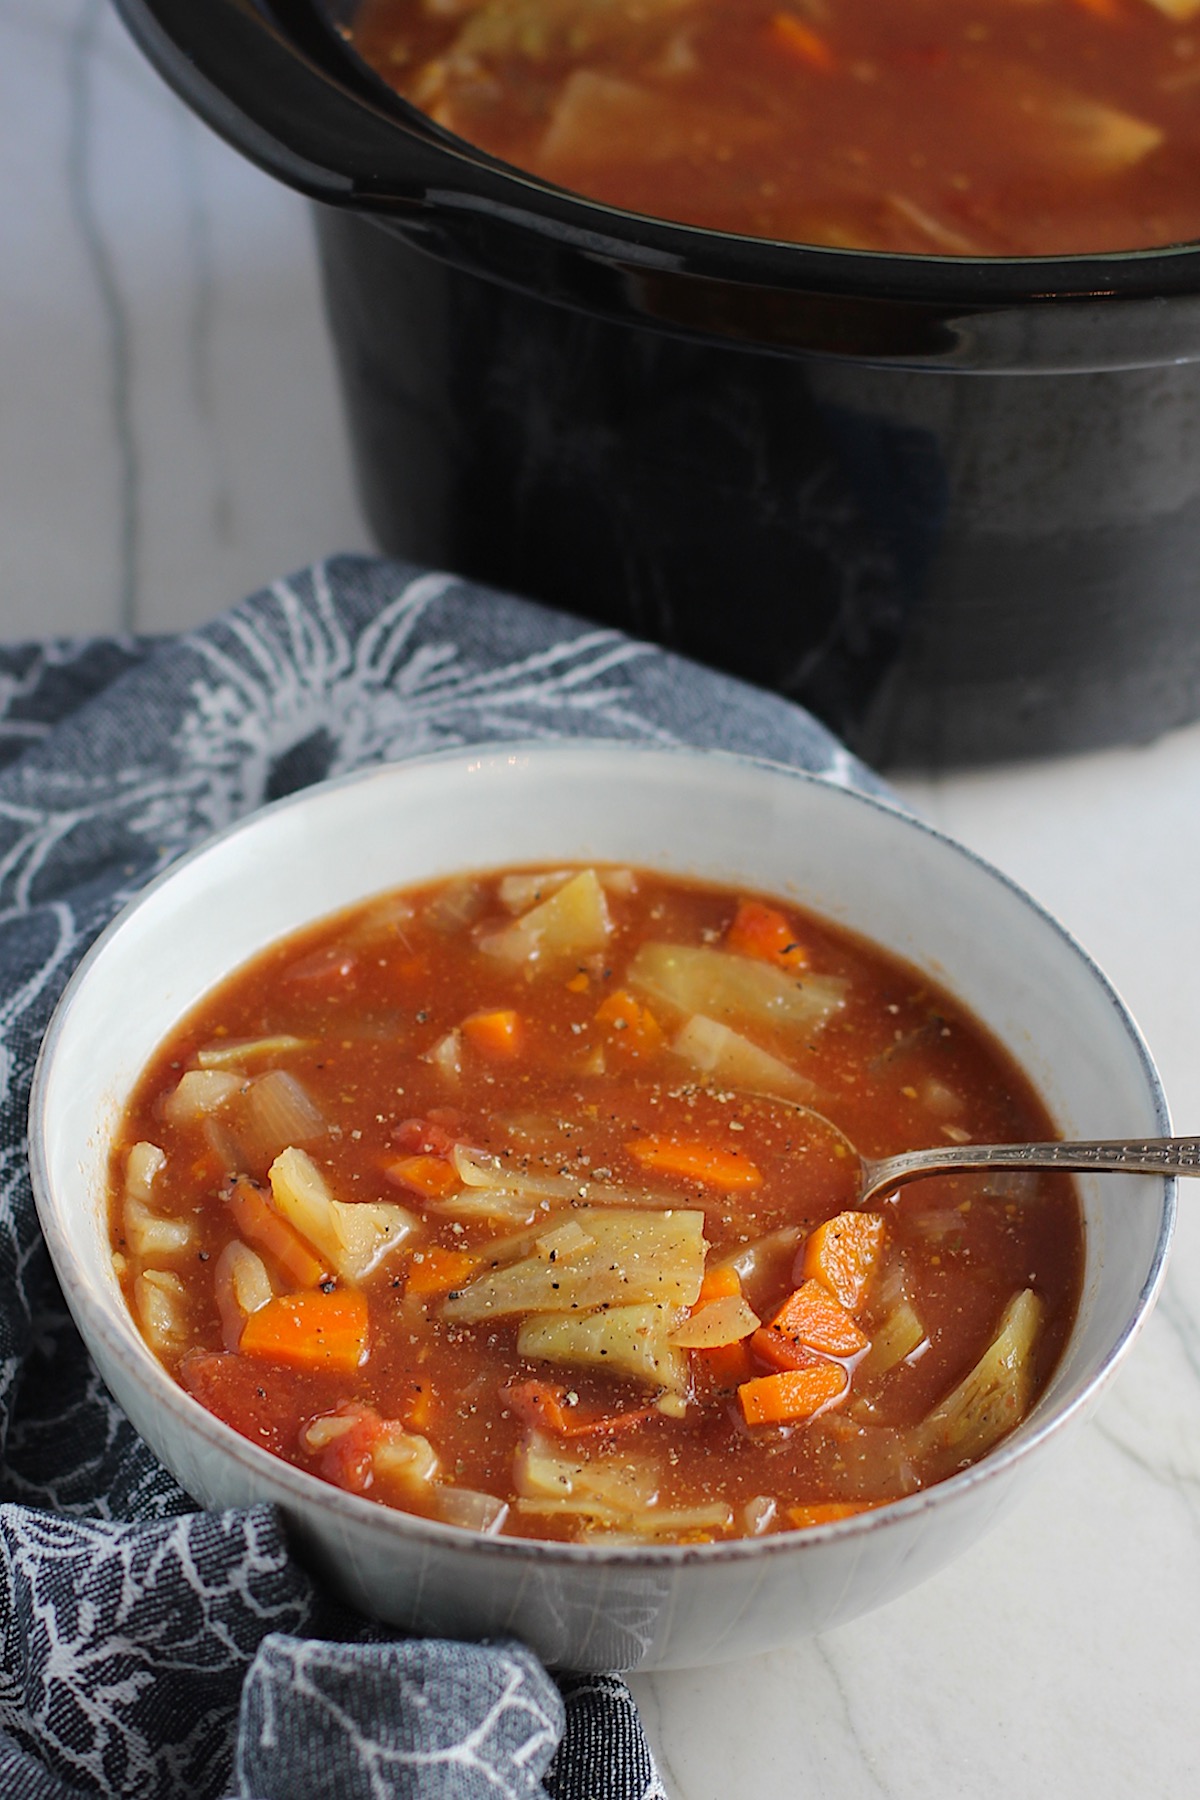 Detox Cabbage Soup recipe in a bowl with spoon on blue napkin on counter with slow cooker in background. The soup is tomato-based with chunky veggies: cabbage, tomato, carrots, onion, and garlic.